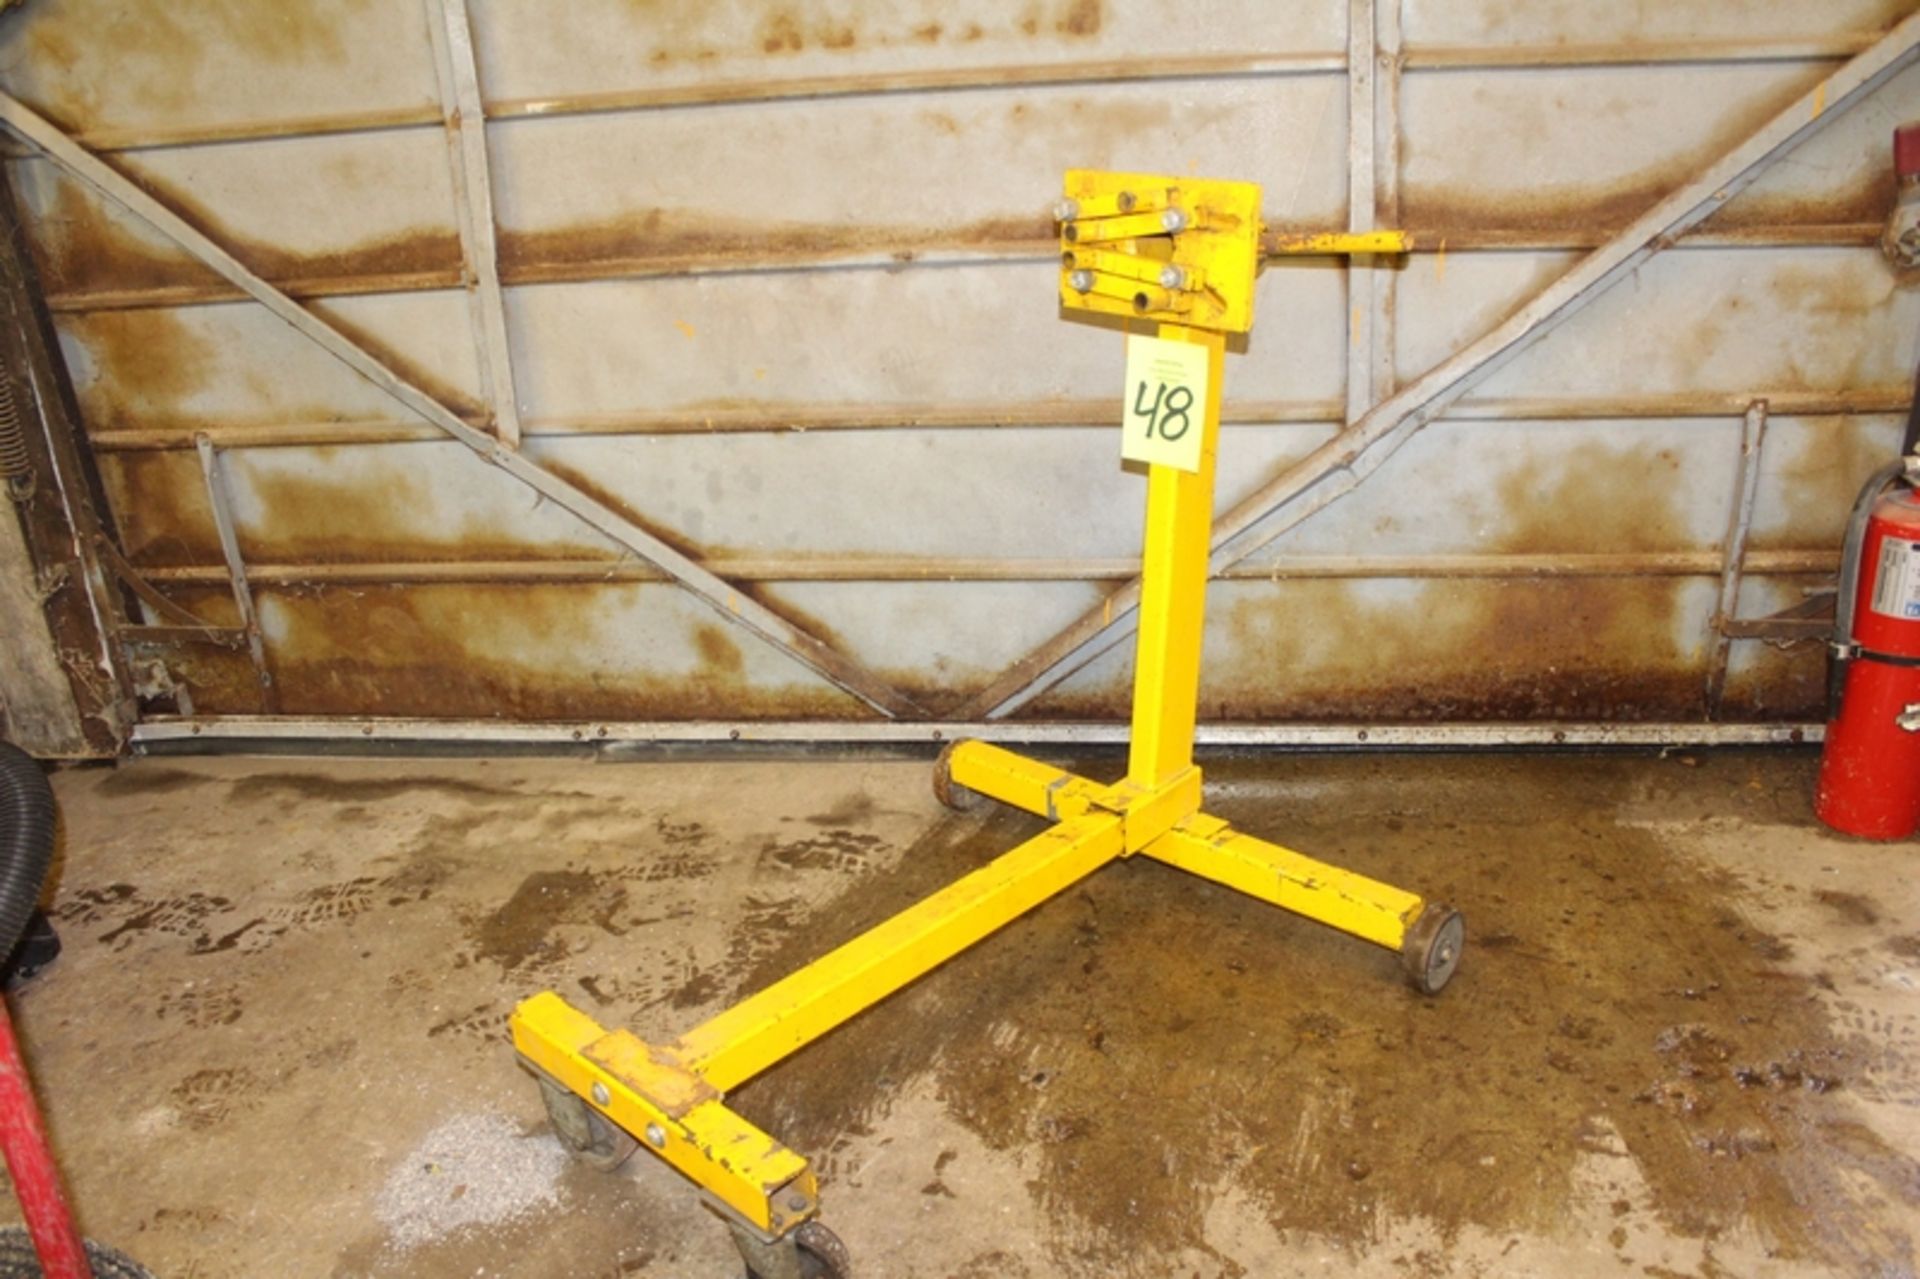 Wilmar Model W41025 1,000 Lb. Capacity Portable Engine Stand - Image 3 of 3